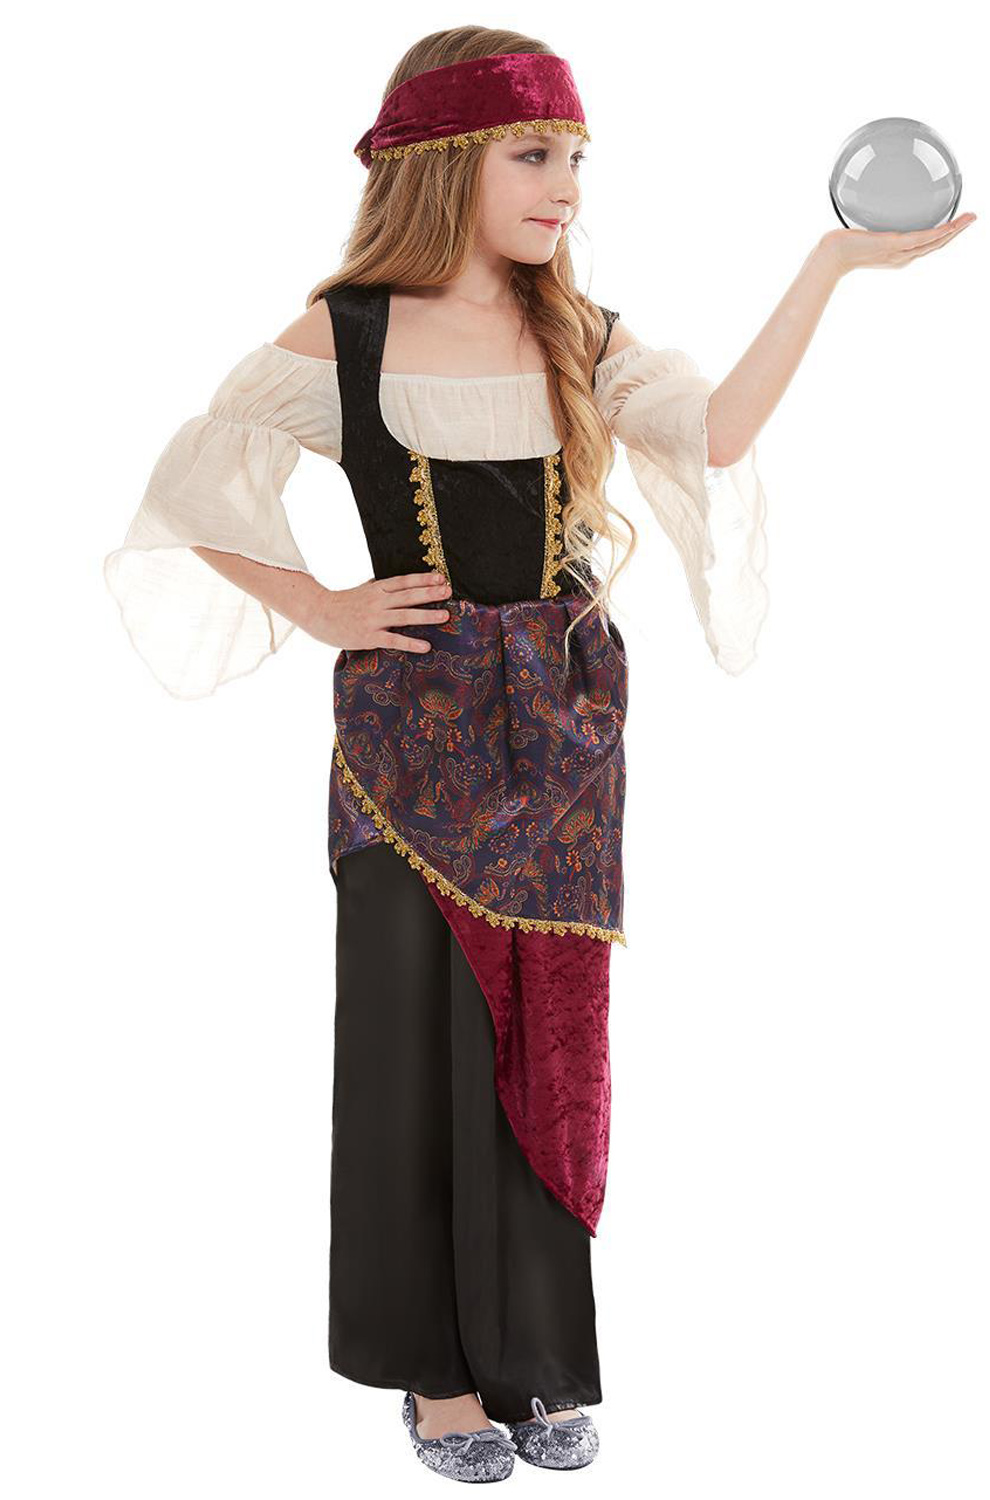 Ladies Mysterious Fortune Teller Circus Gypsy Fancy Dress Halloween Costume